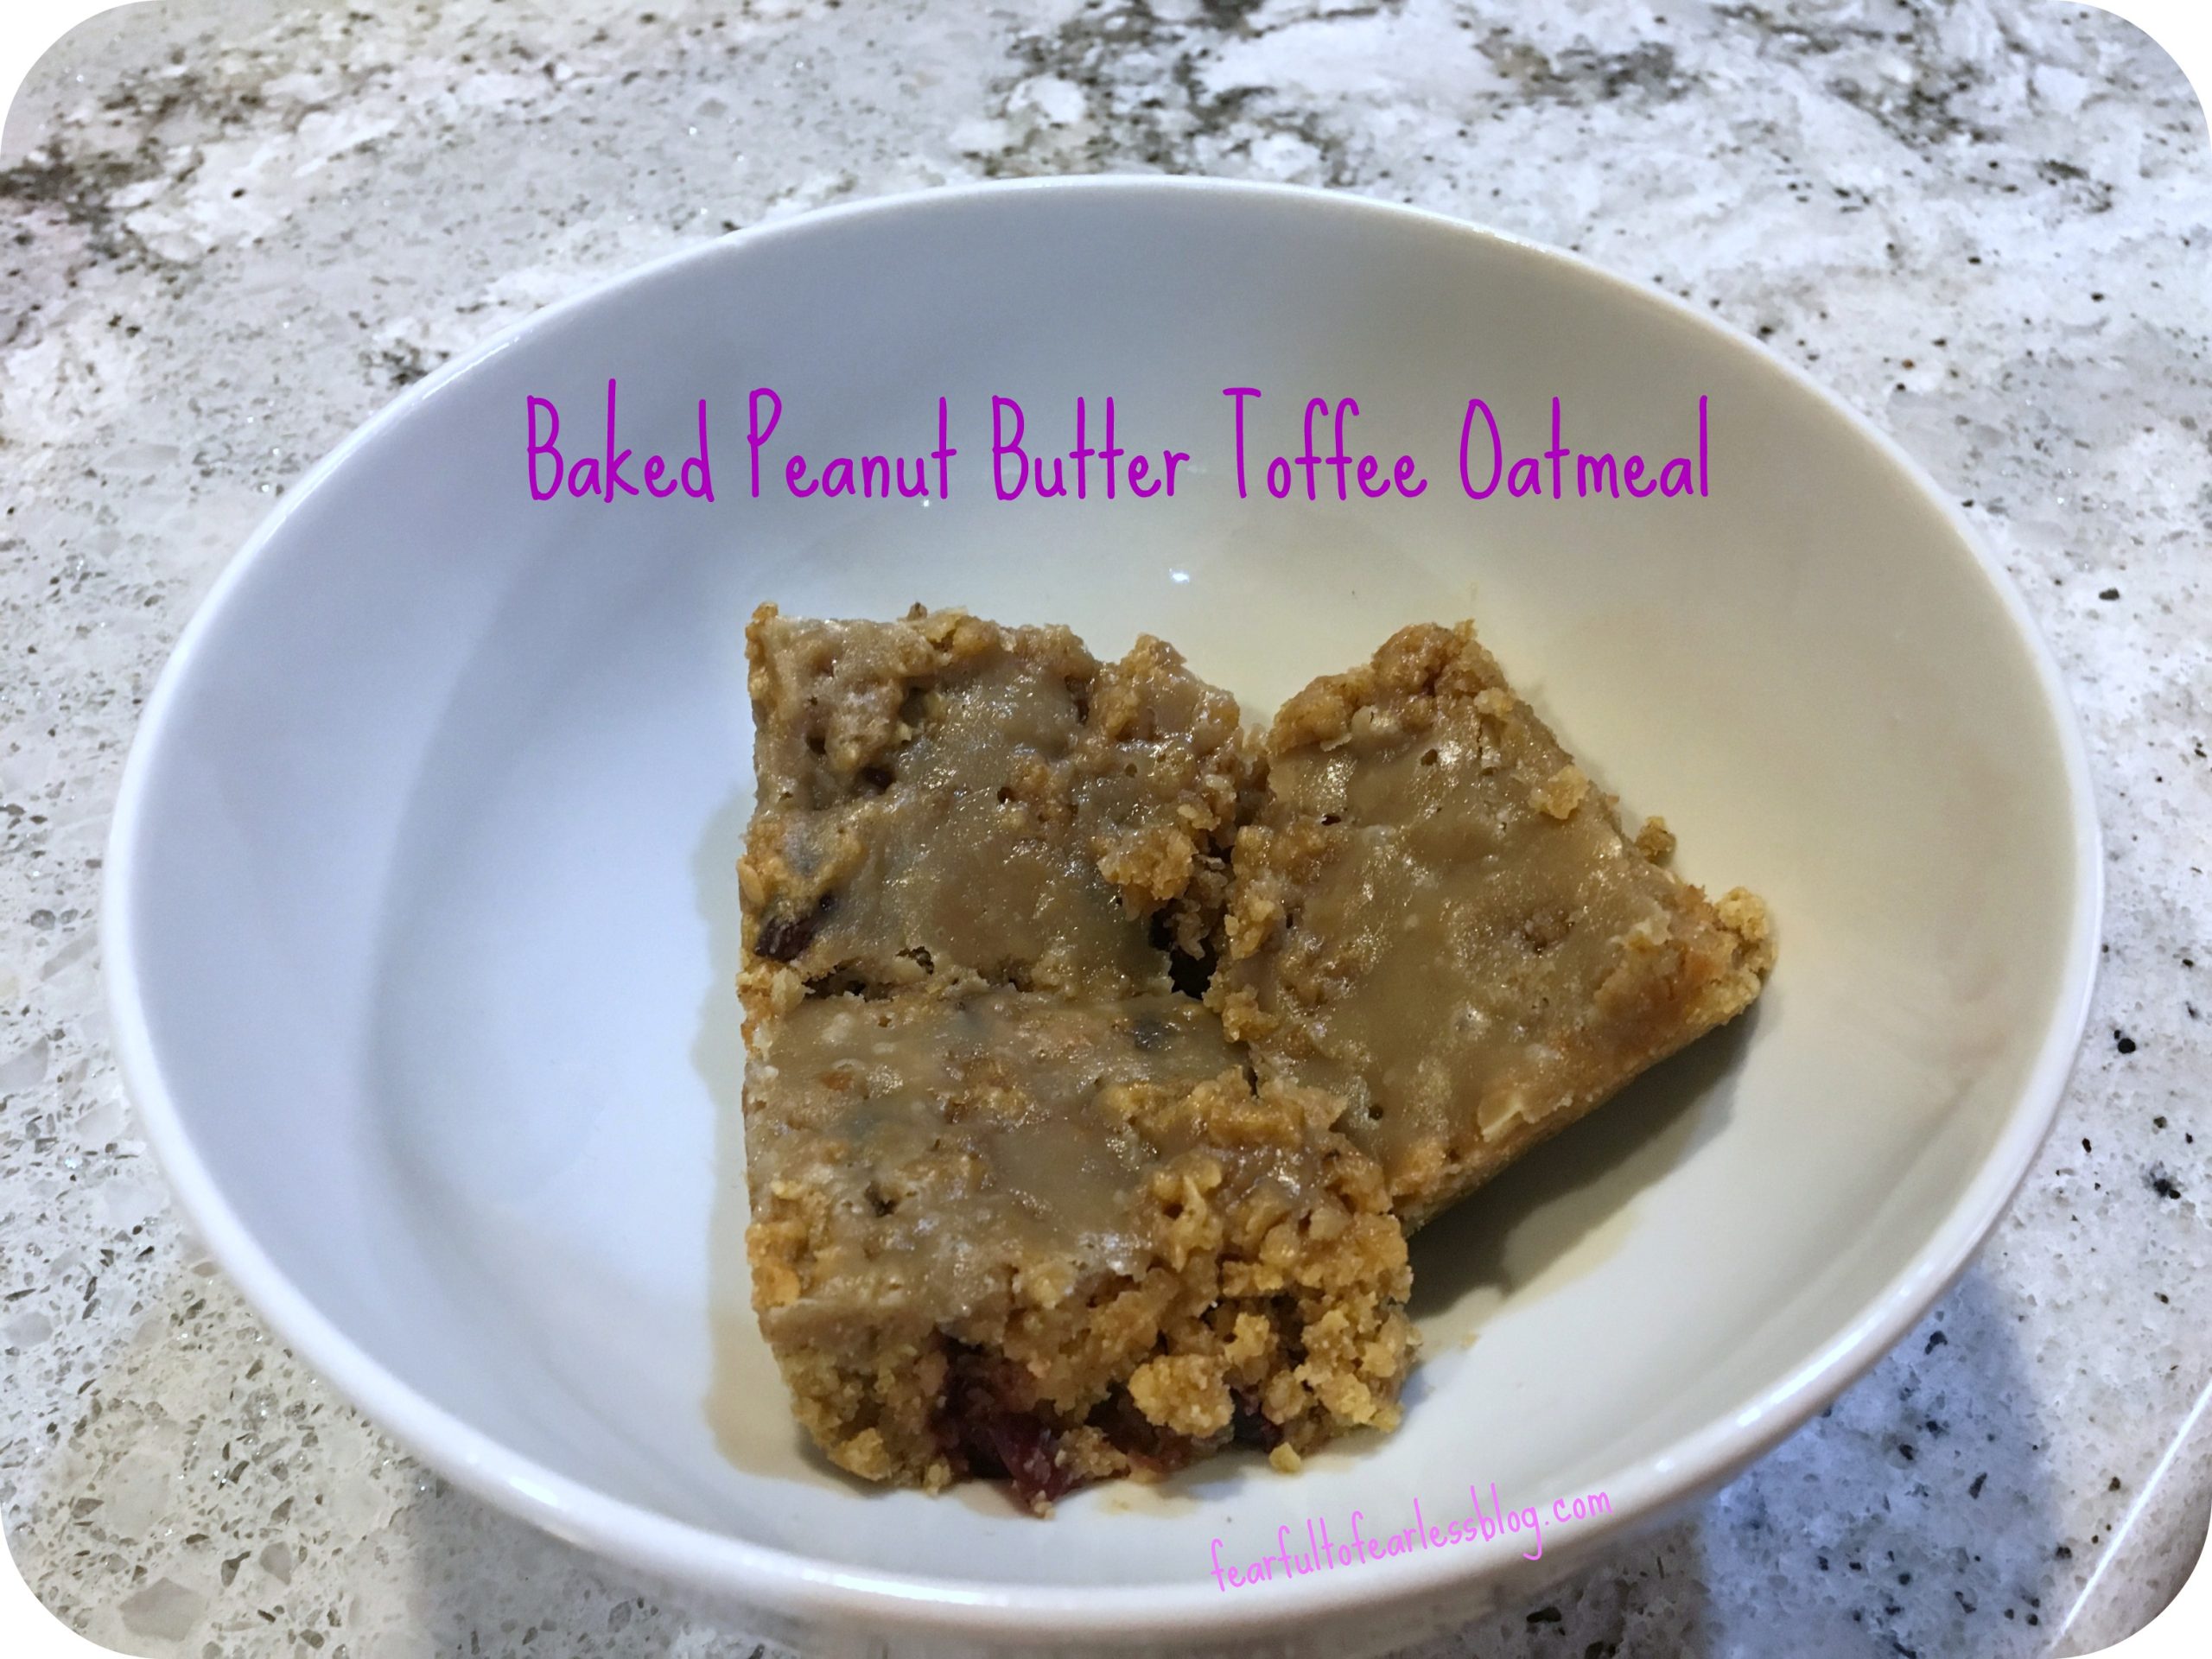 Baked peanut butter oatmeal with toffee